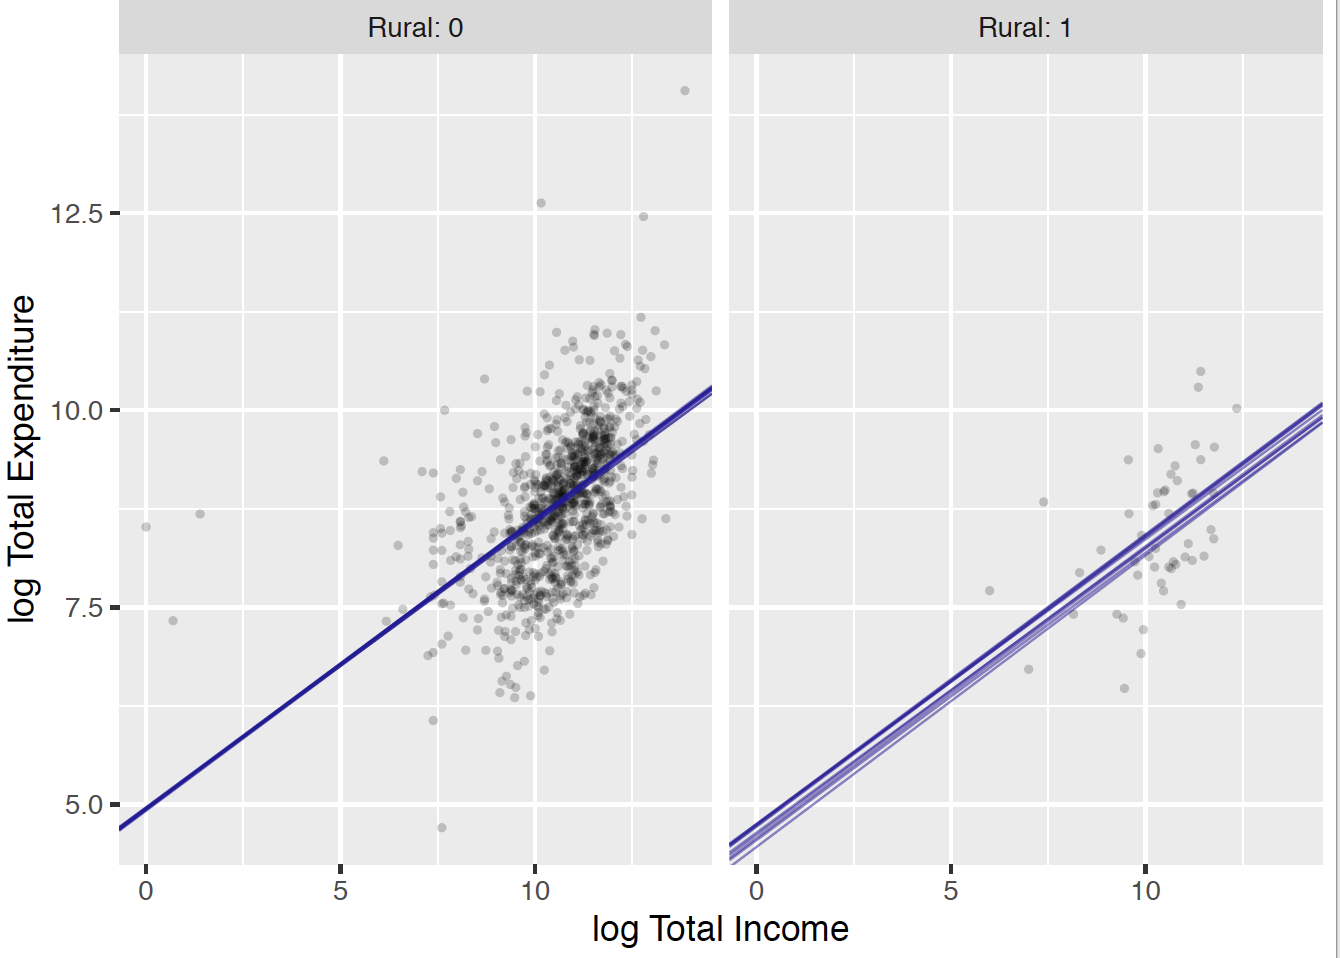 Scatterplot of log income and log expenditure for the urban and rural groups.  The superposed lines represent draws from the posterior distribution of the expected response.